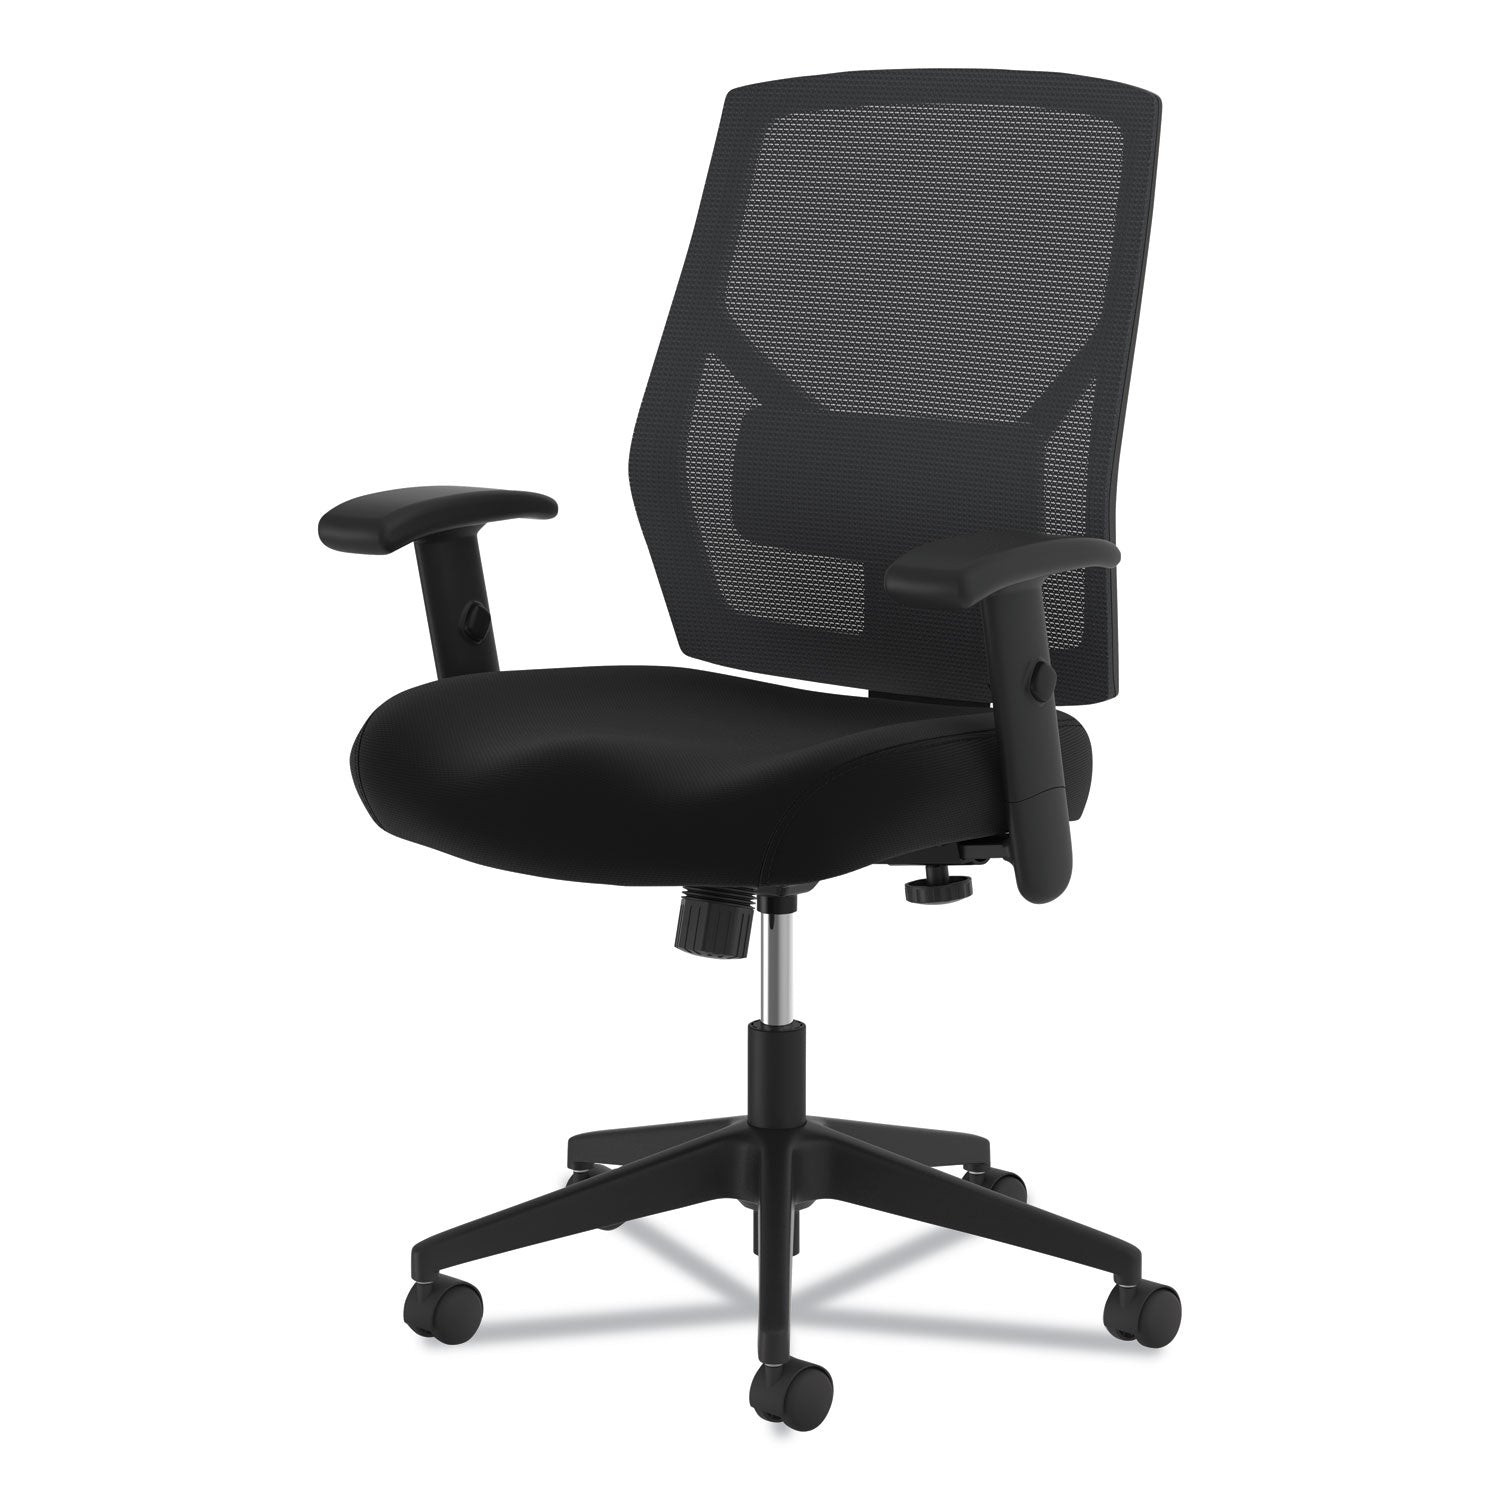 vl581-high-back-task-chair-supports-up-to-250-lb-18-to-22-seat-height-black_bsxvl581es10t - 3